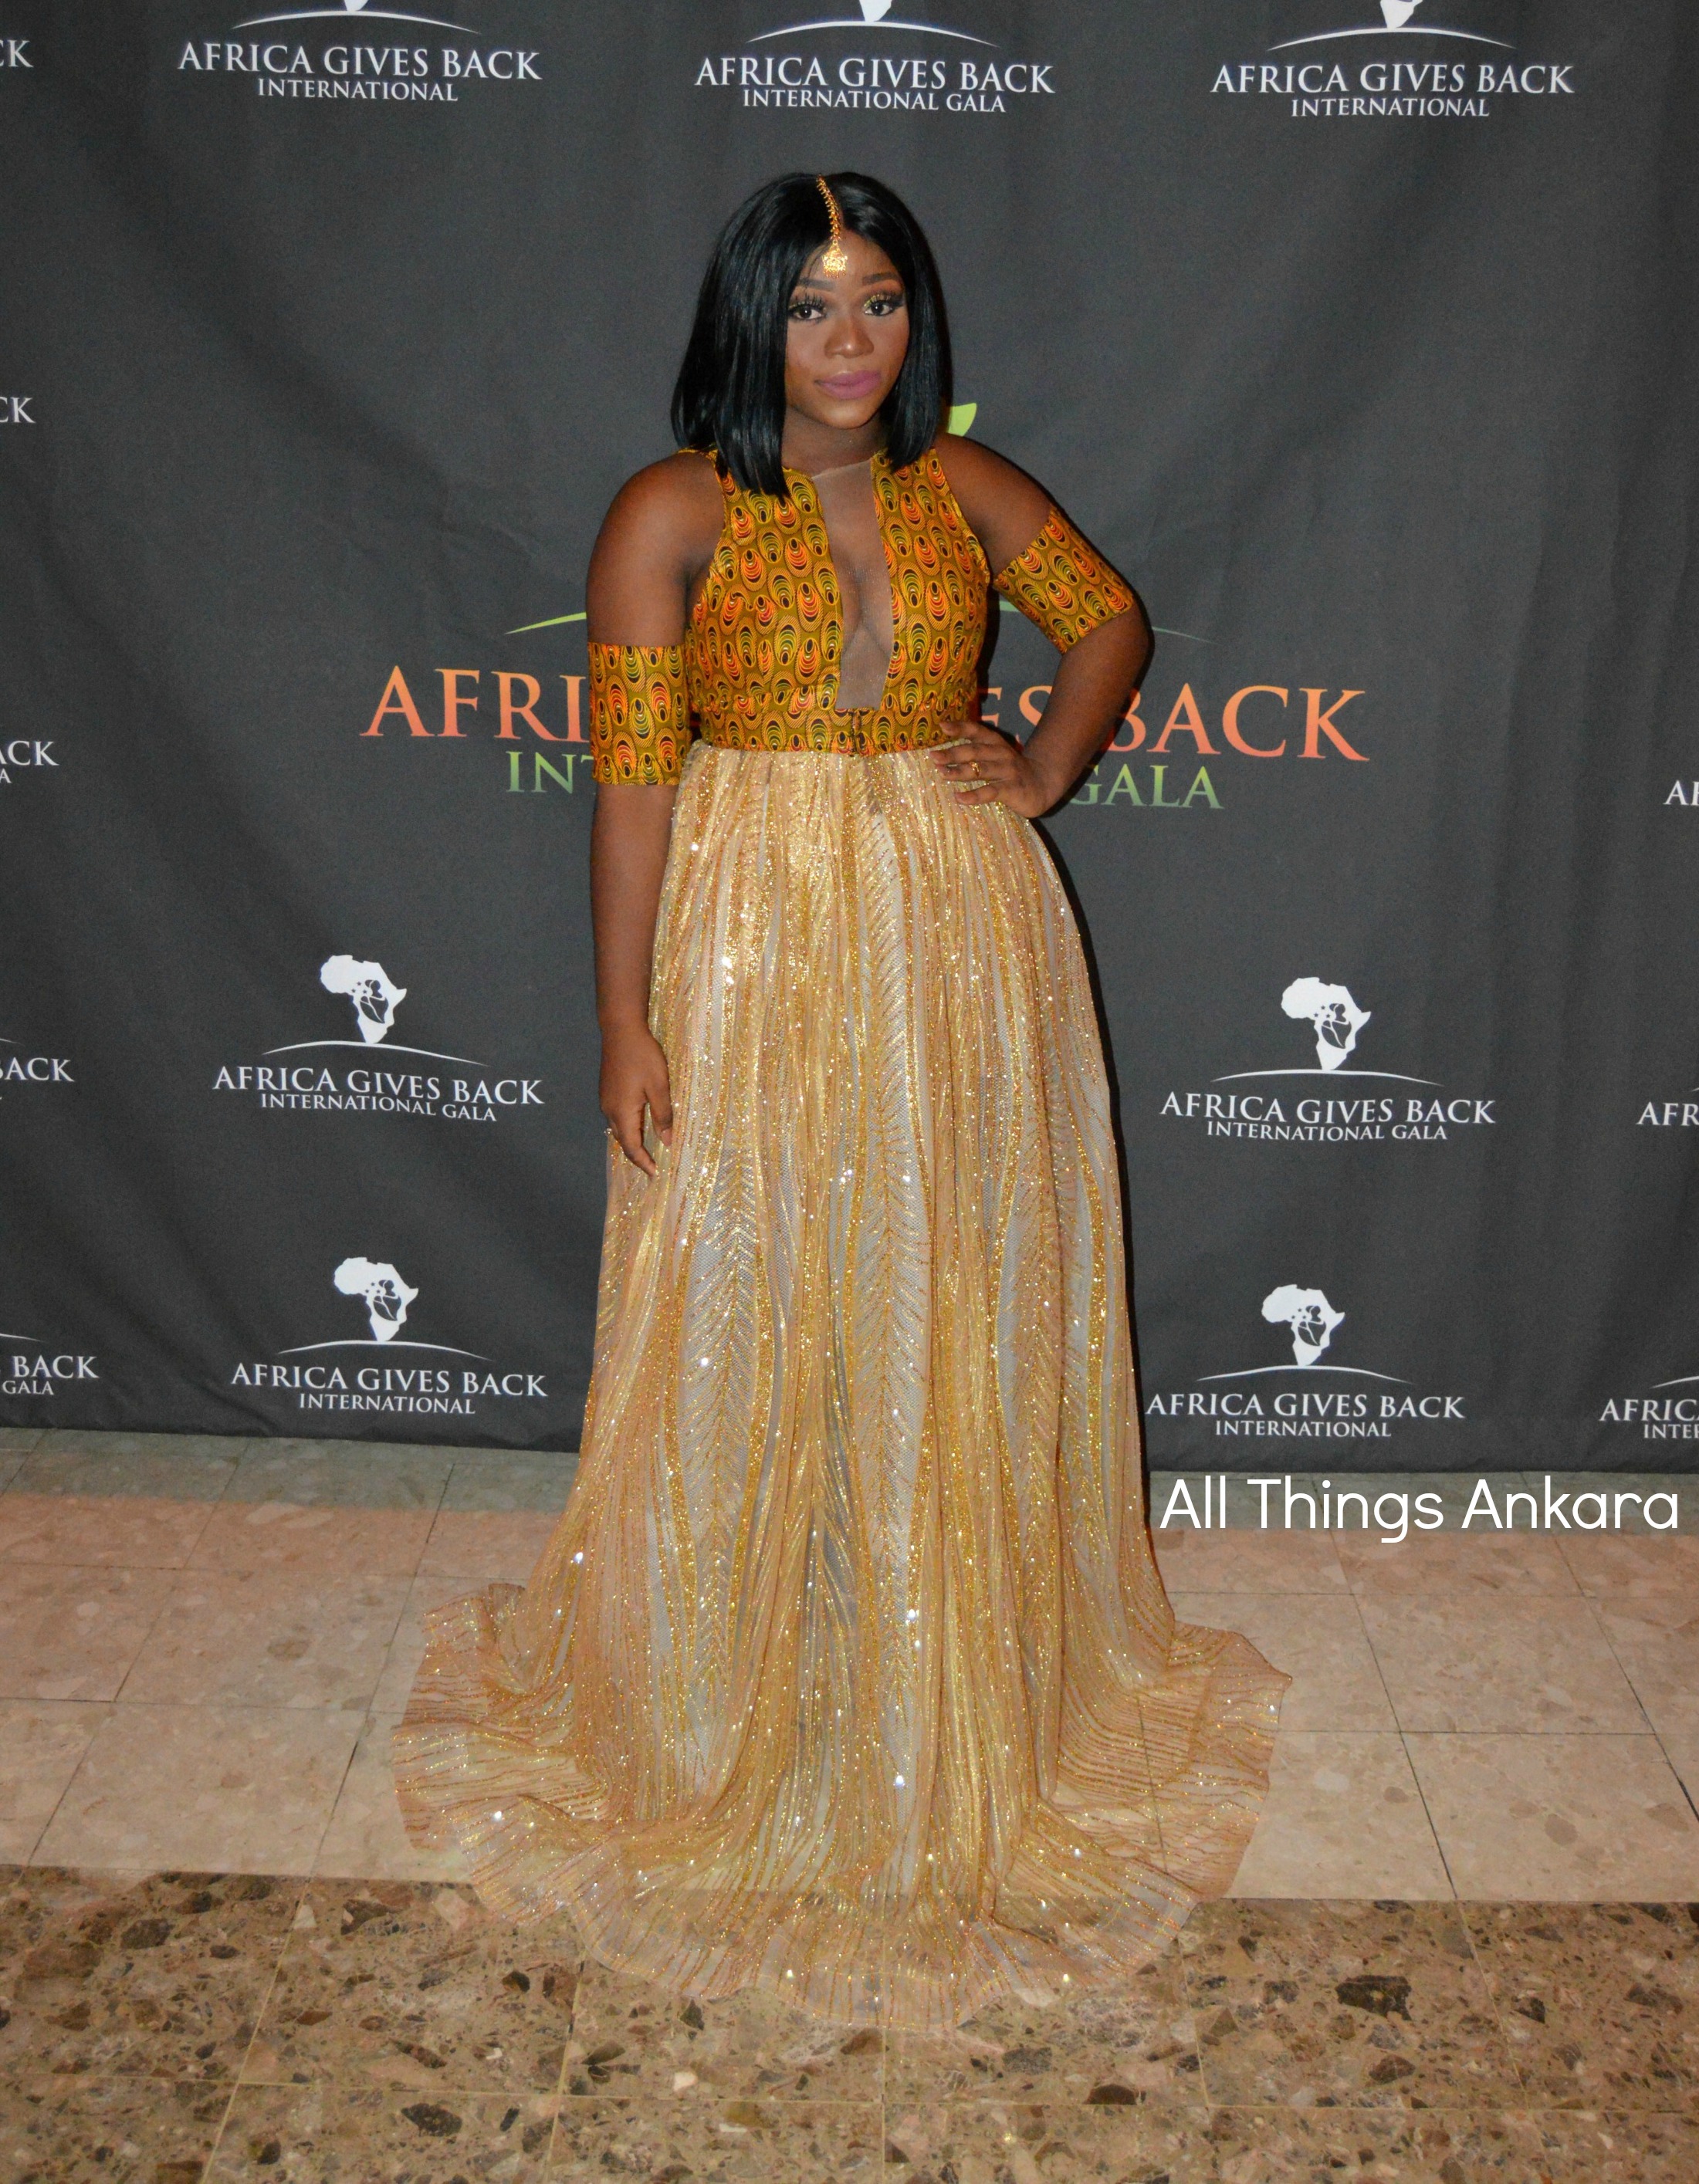 Gala-All Things Ankara's Best Dressed Women at Africa Gives Back International Gala 2016 1